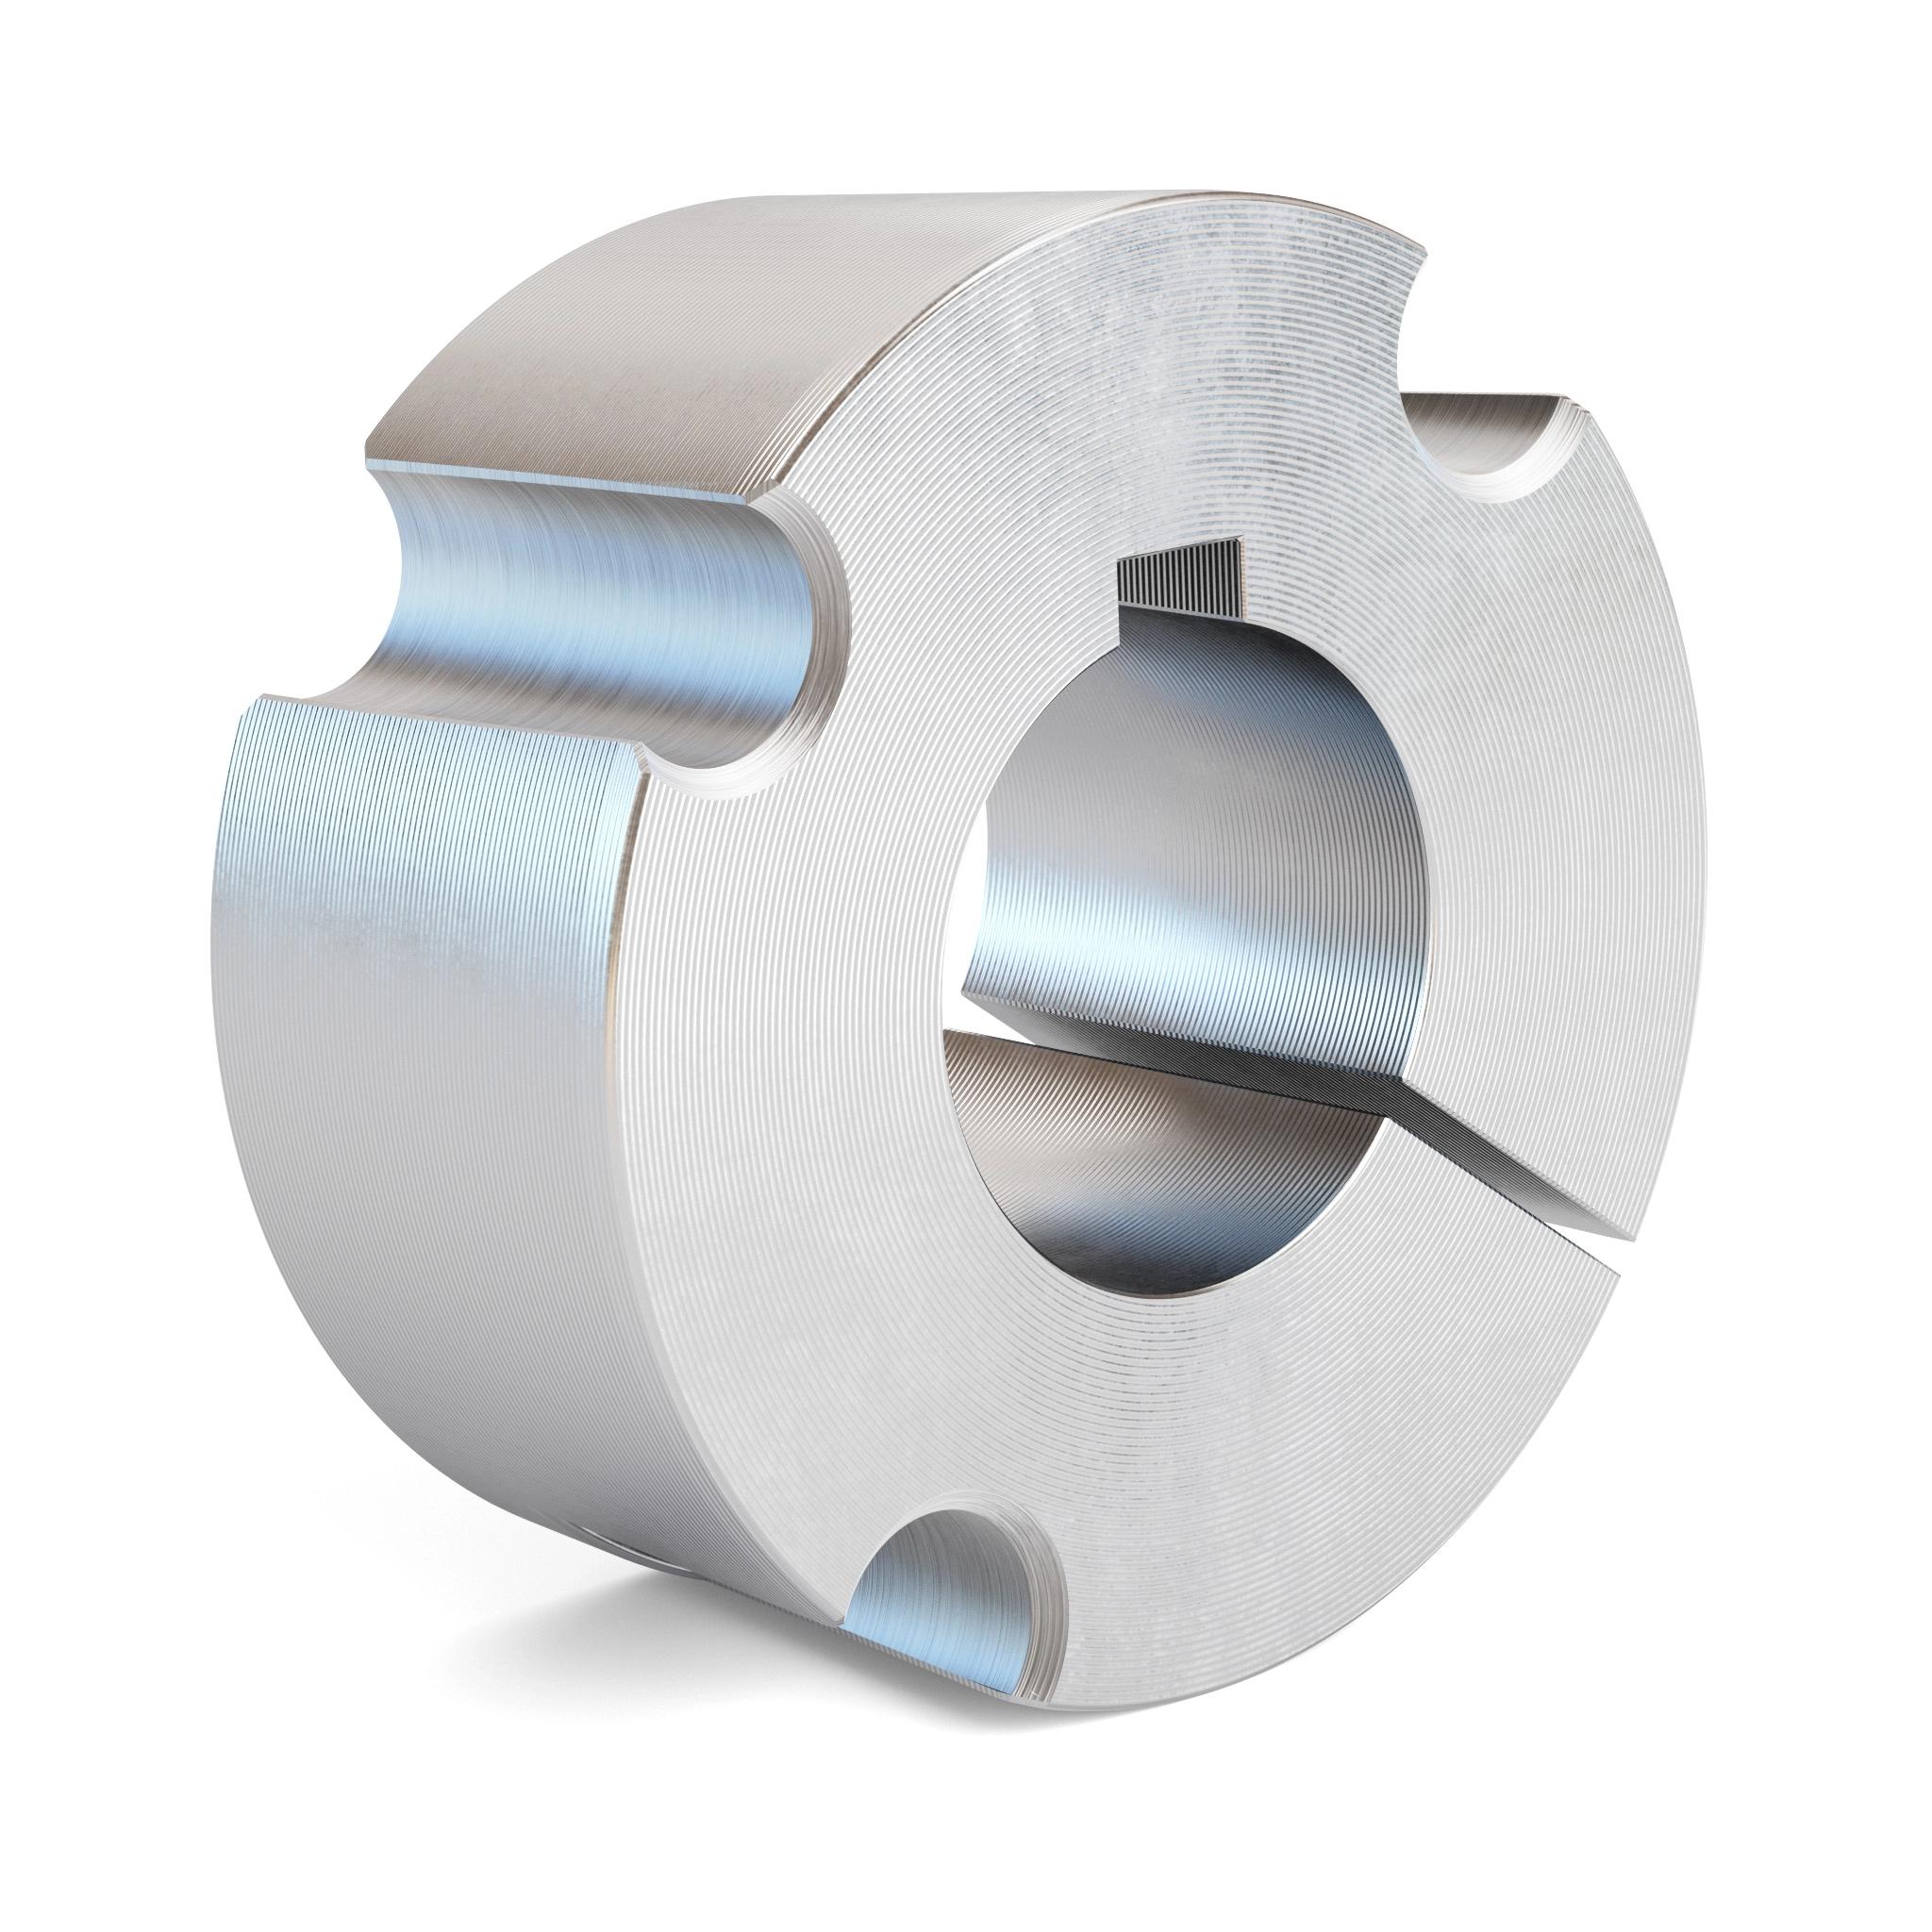 Gates 5050 4.7/8 Taper-Lock Bushings, 5050 4.7/8 BUSH 32 X 6Use with all Taper-Lock® style sheaves, sprockets and pulleys.